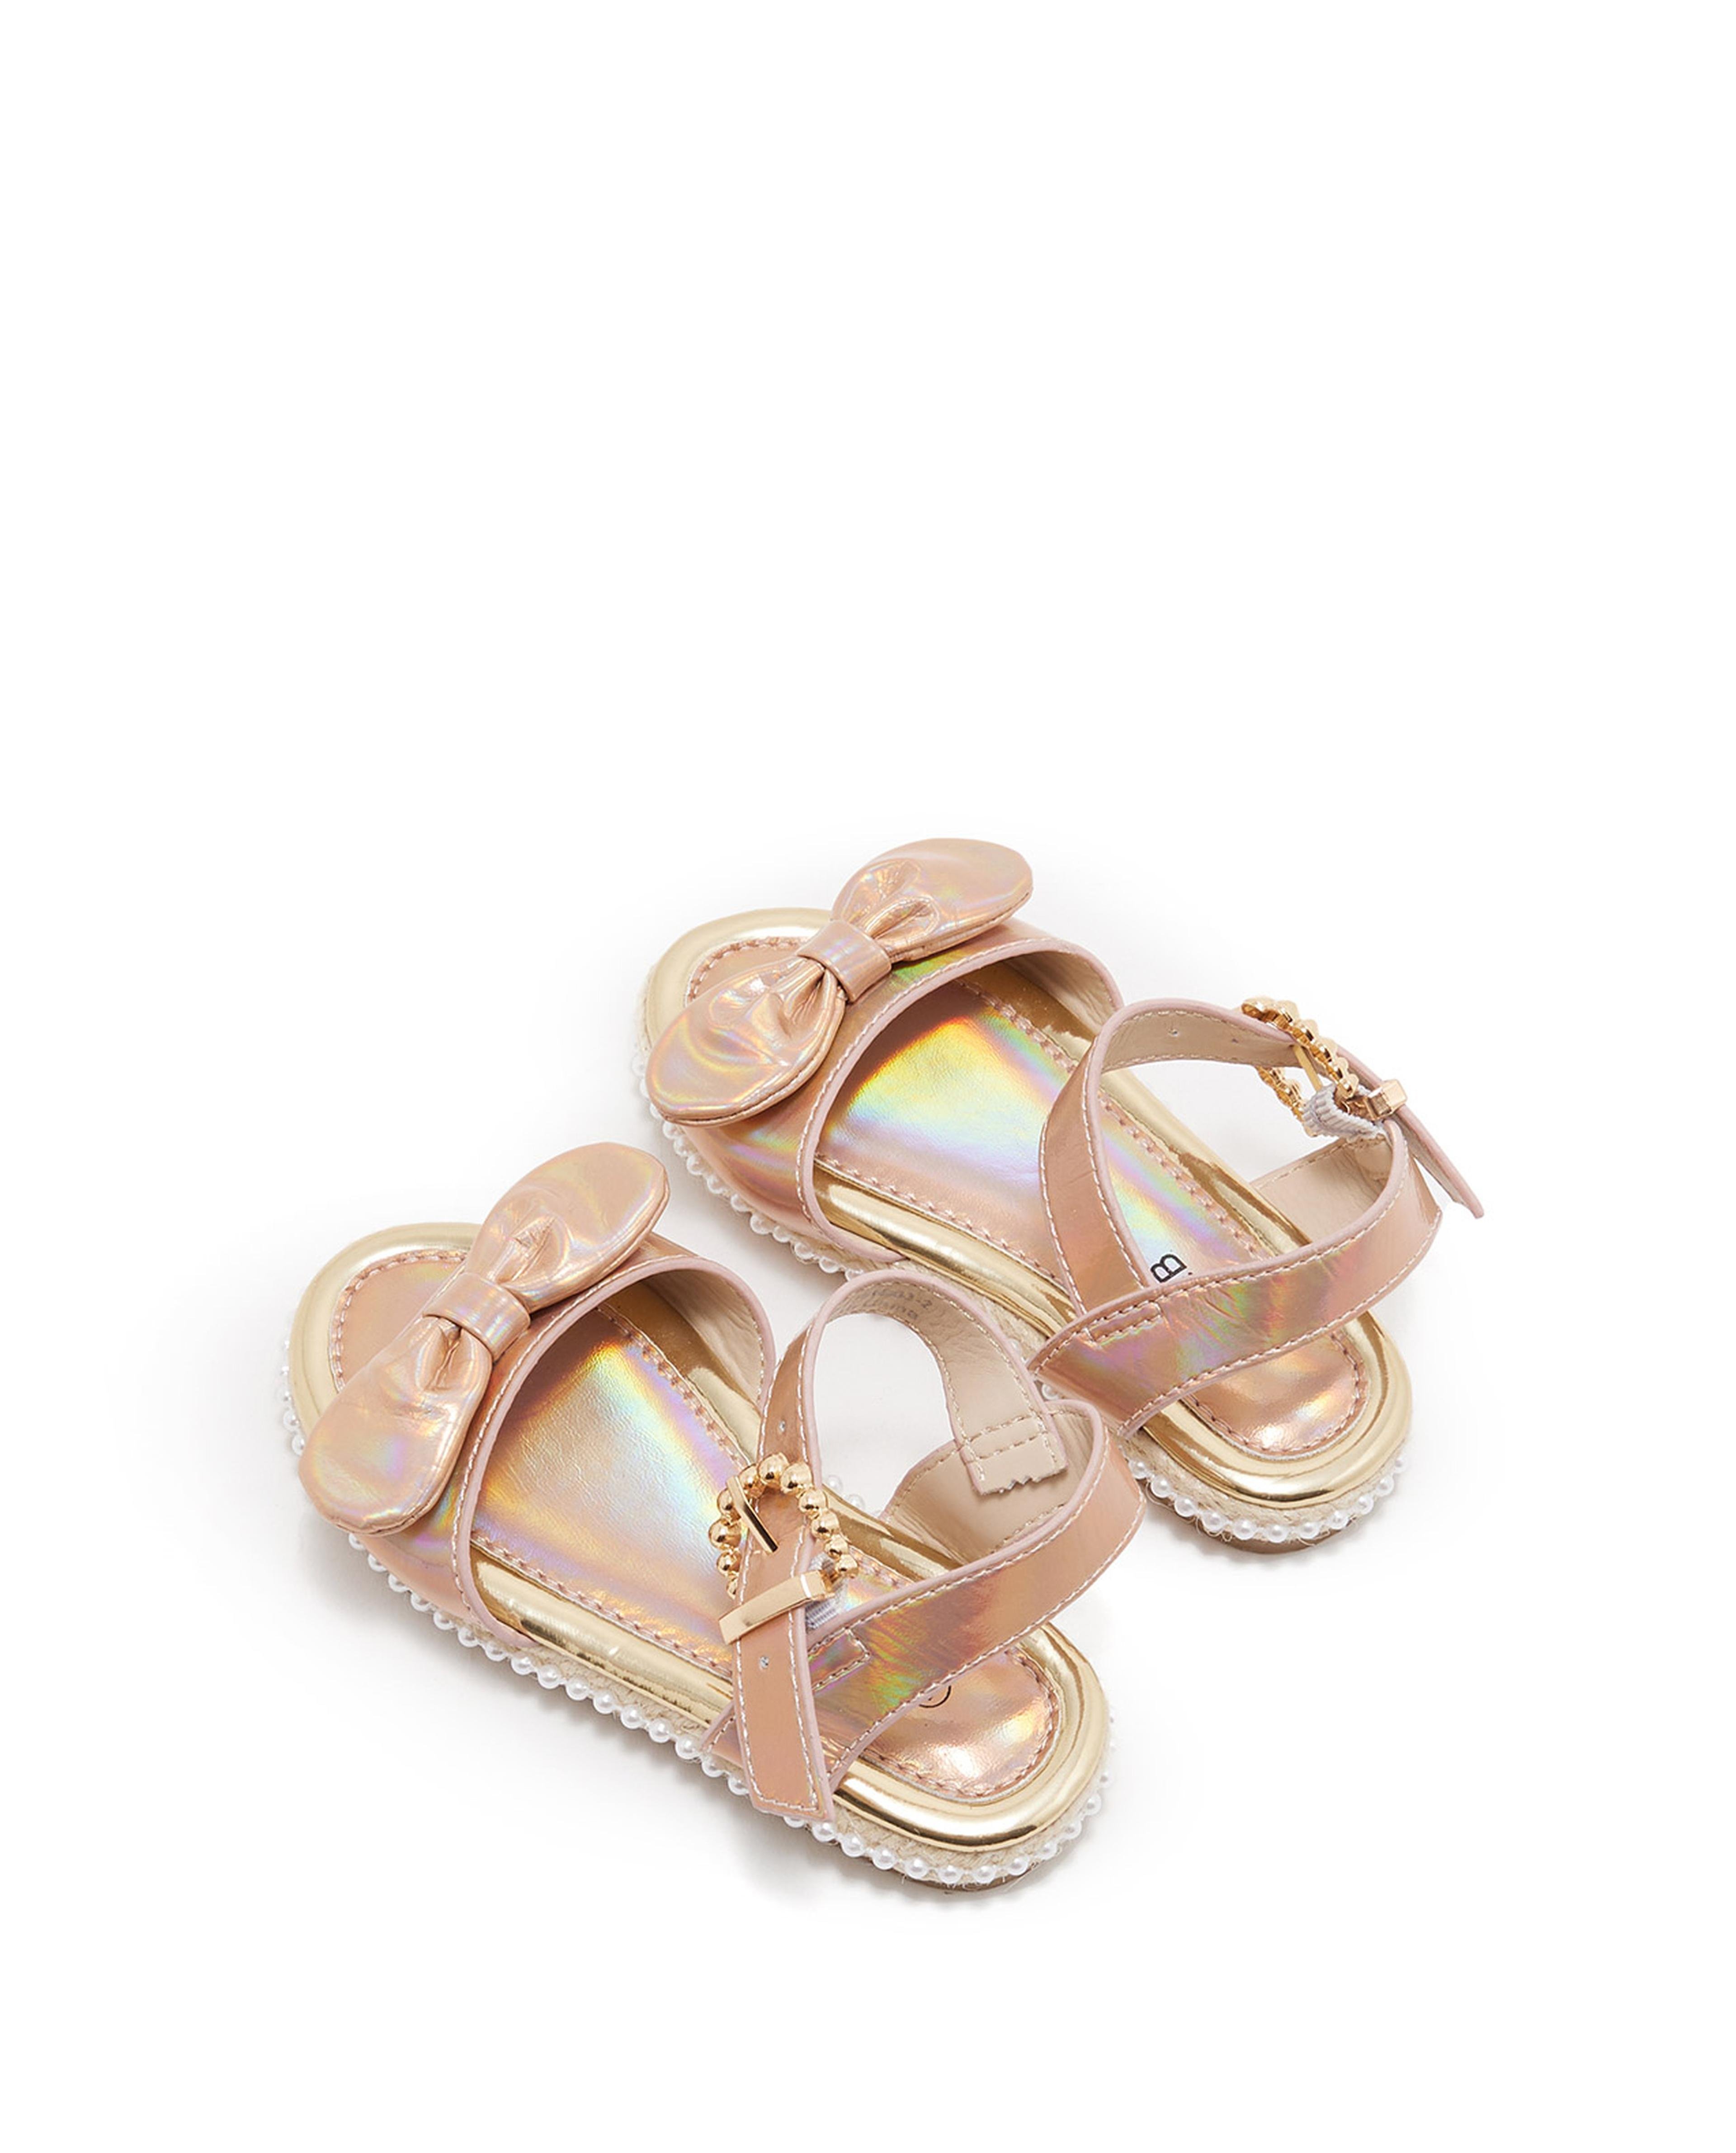 Bow Detail Sandals with Buckle Closure